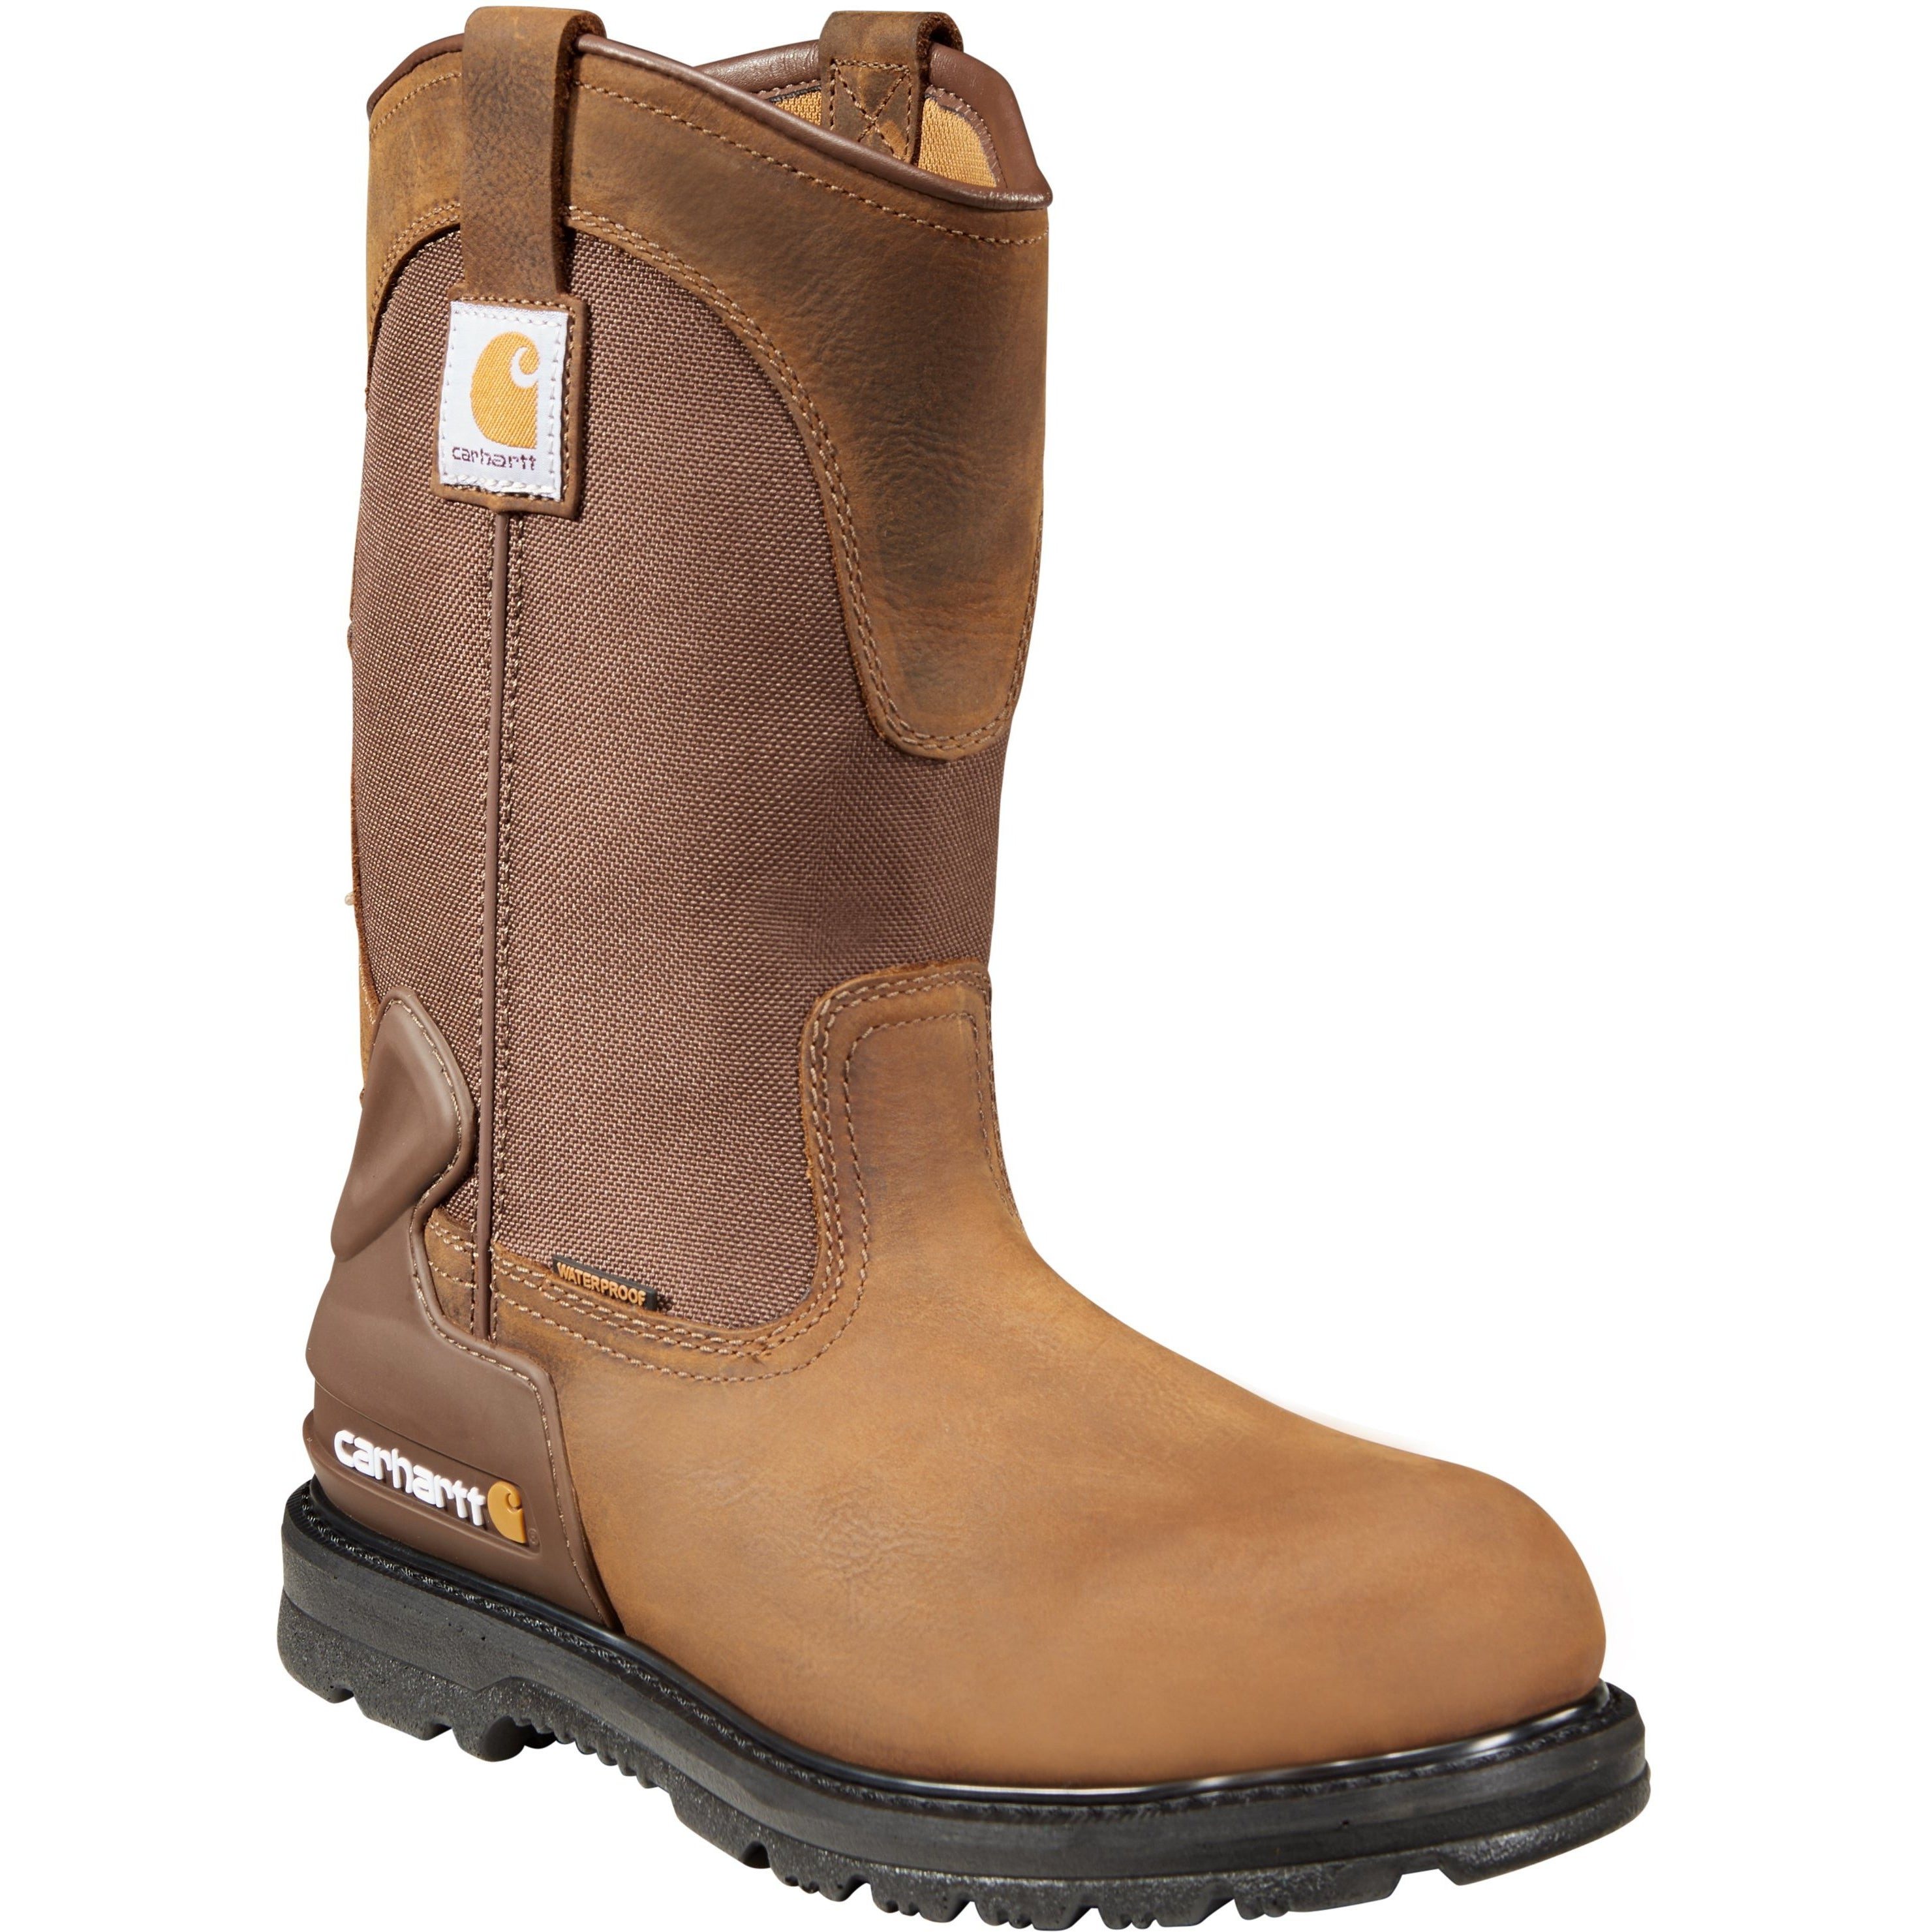 Carhartt 10 Inch Insulated Composite Toe EH PAC Boot Work Shoes Brown- Mens- Size 9